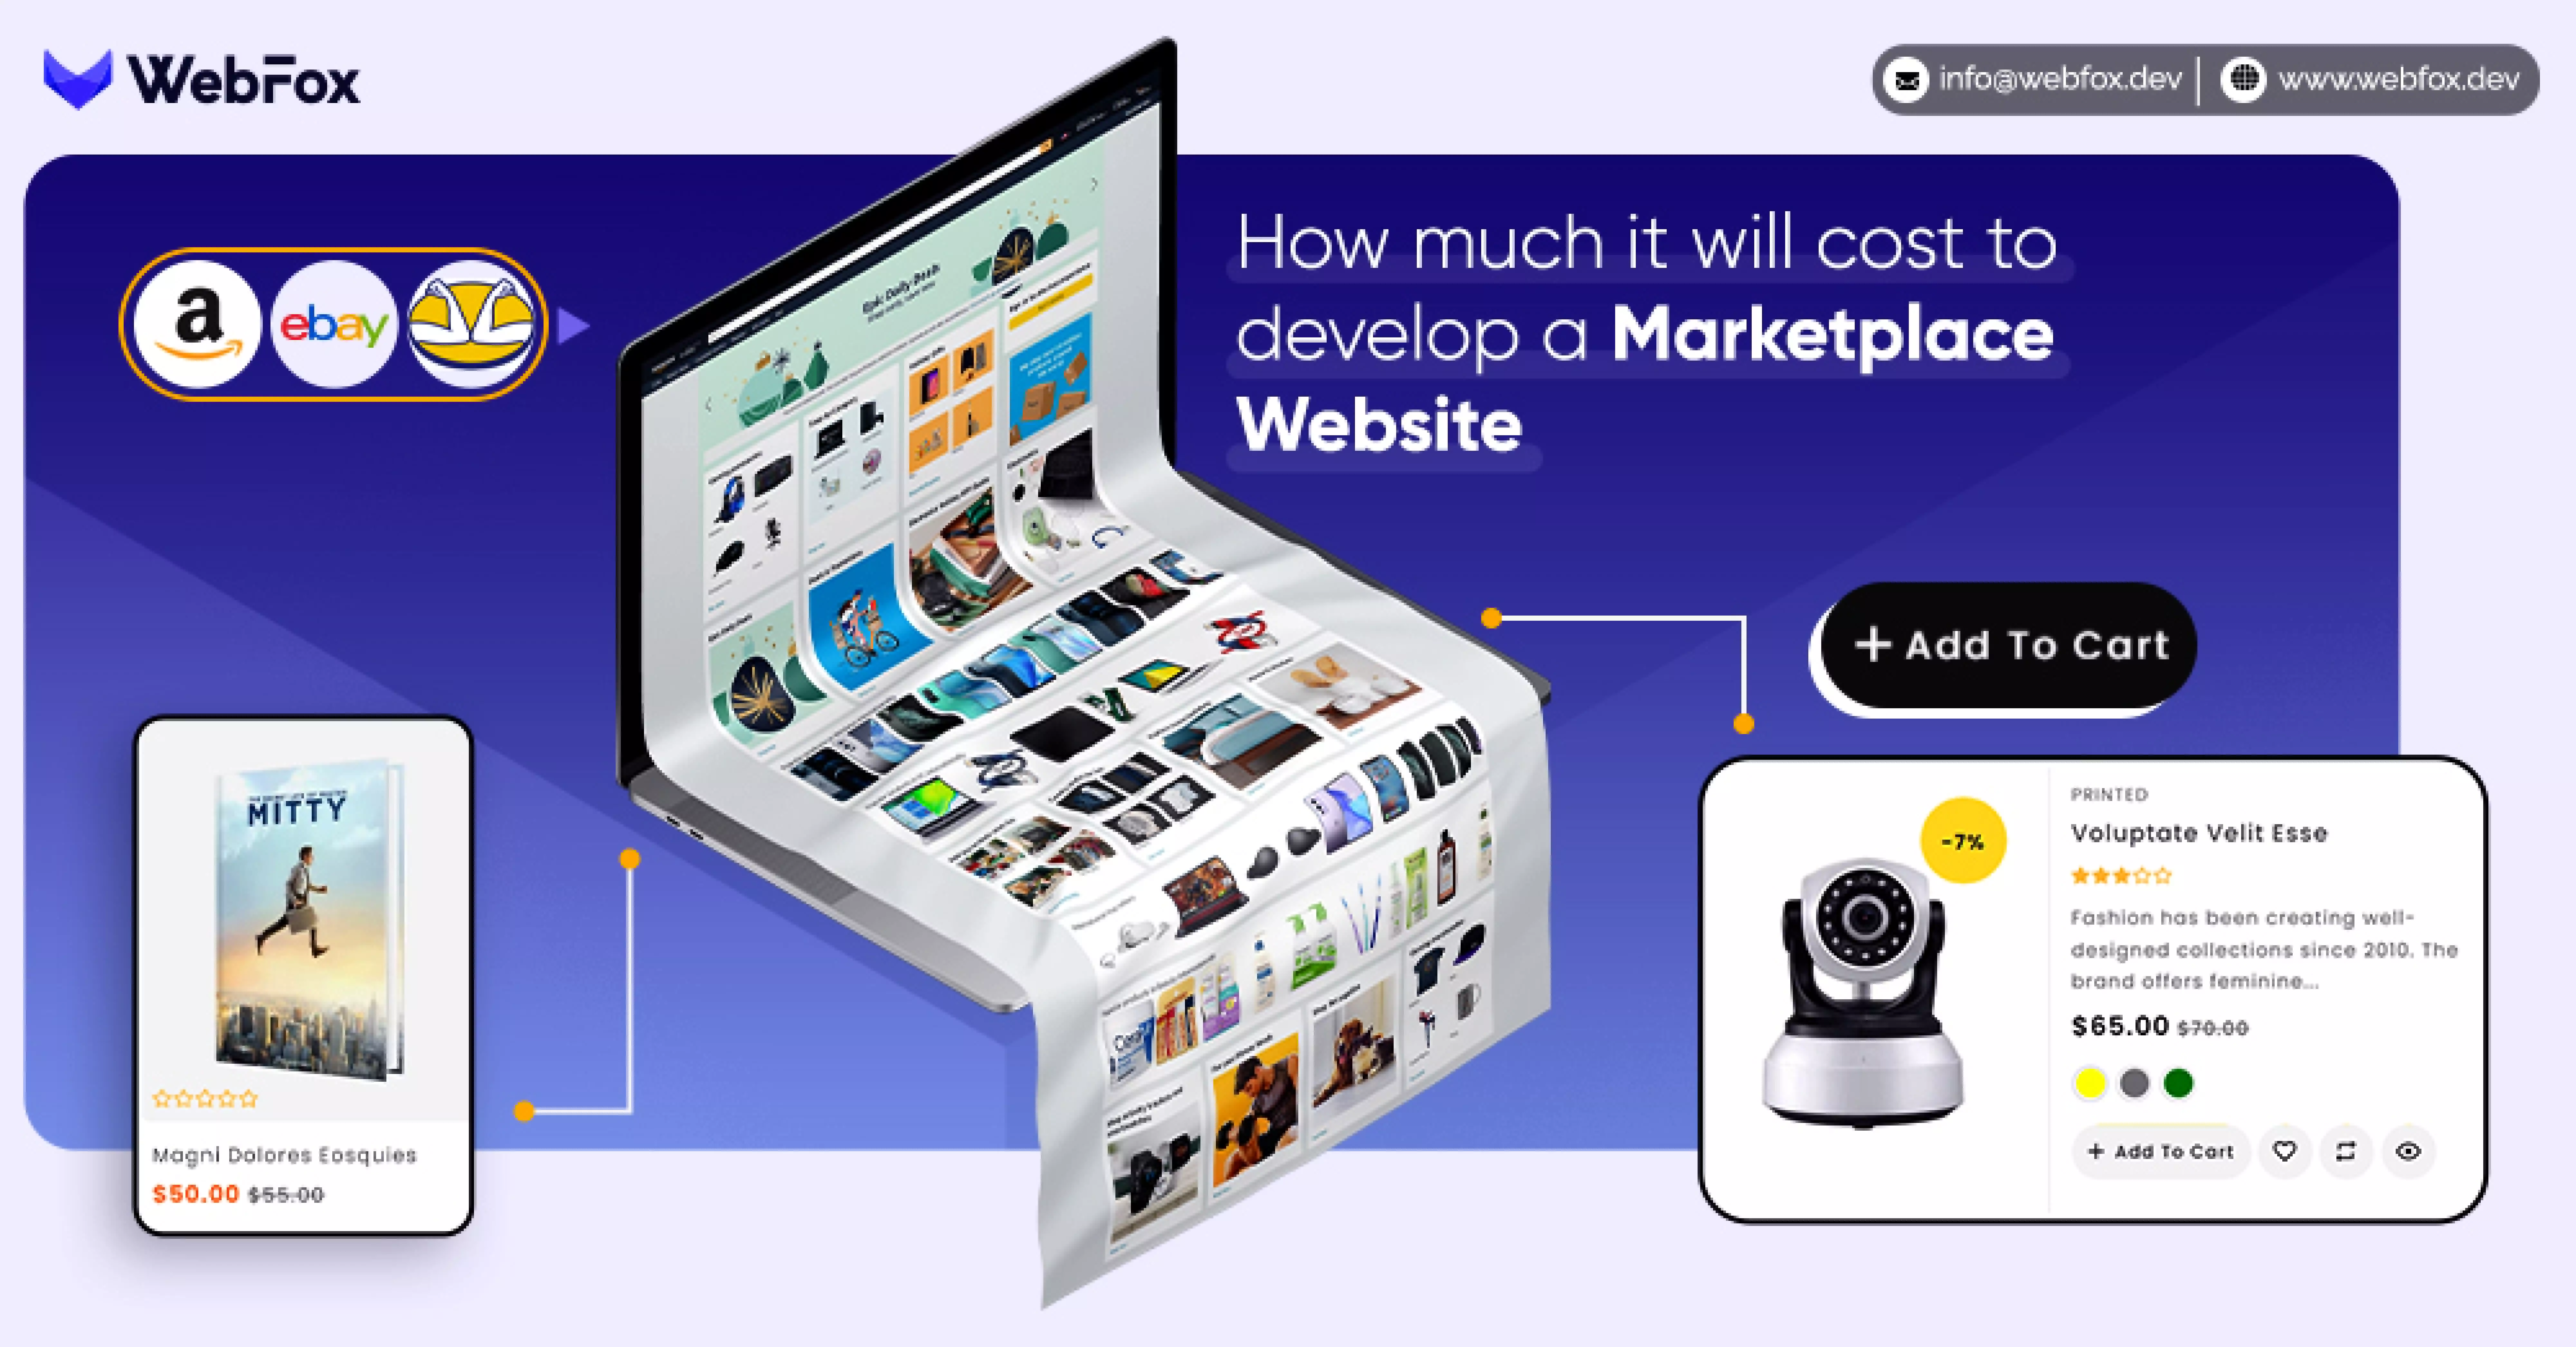 How much it will cost to develop a Marketplace Website